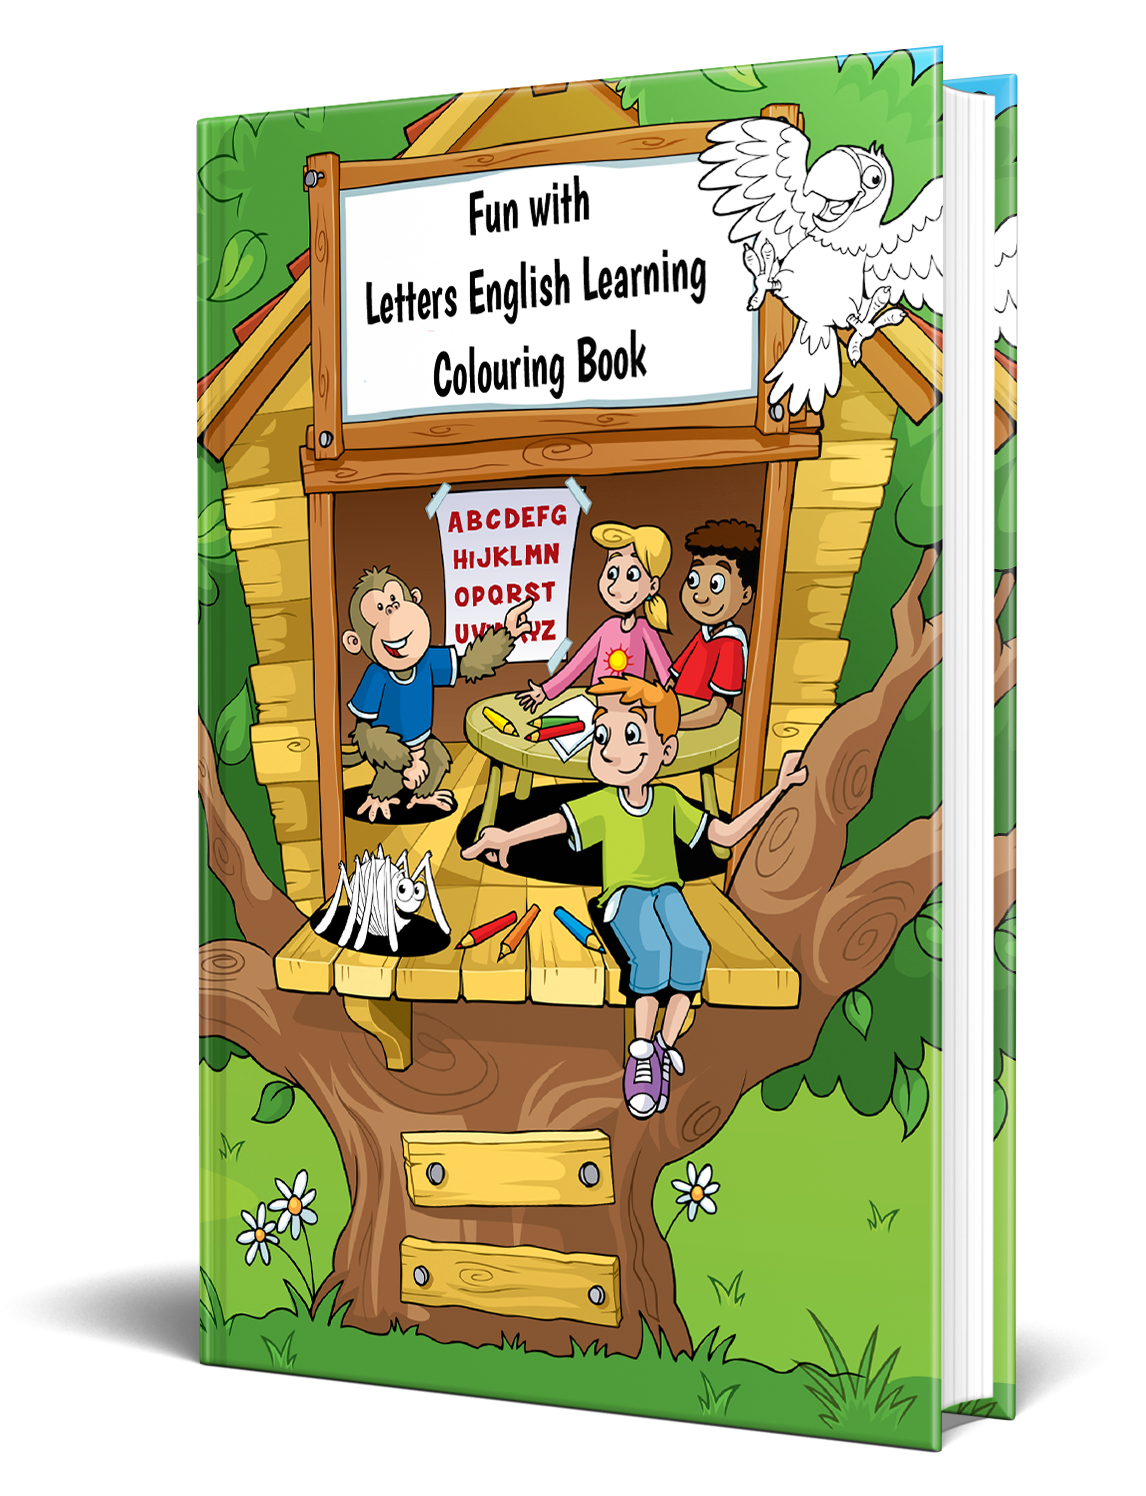 Fun with Letters English Learning Colouring Book